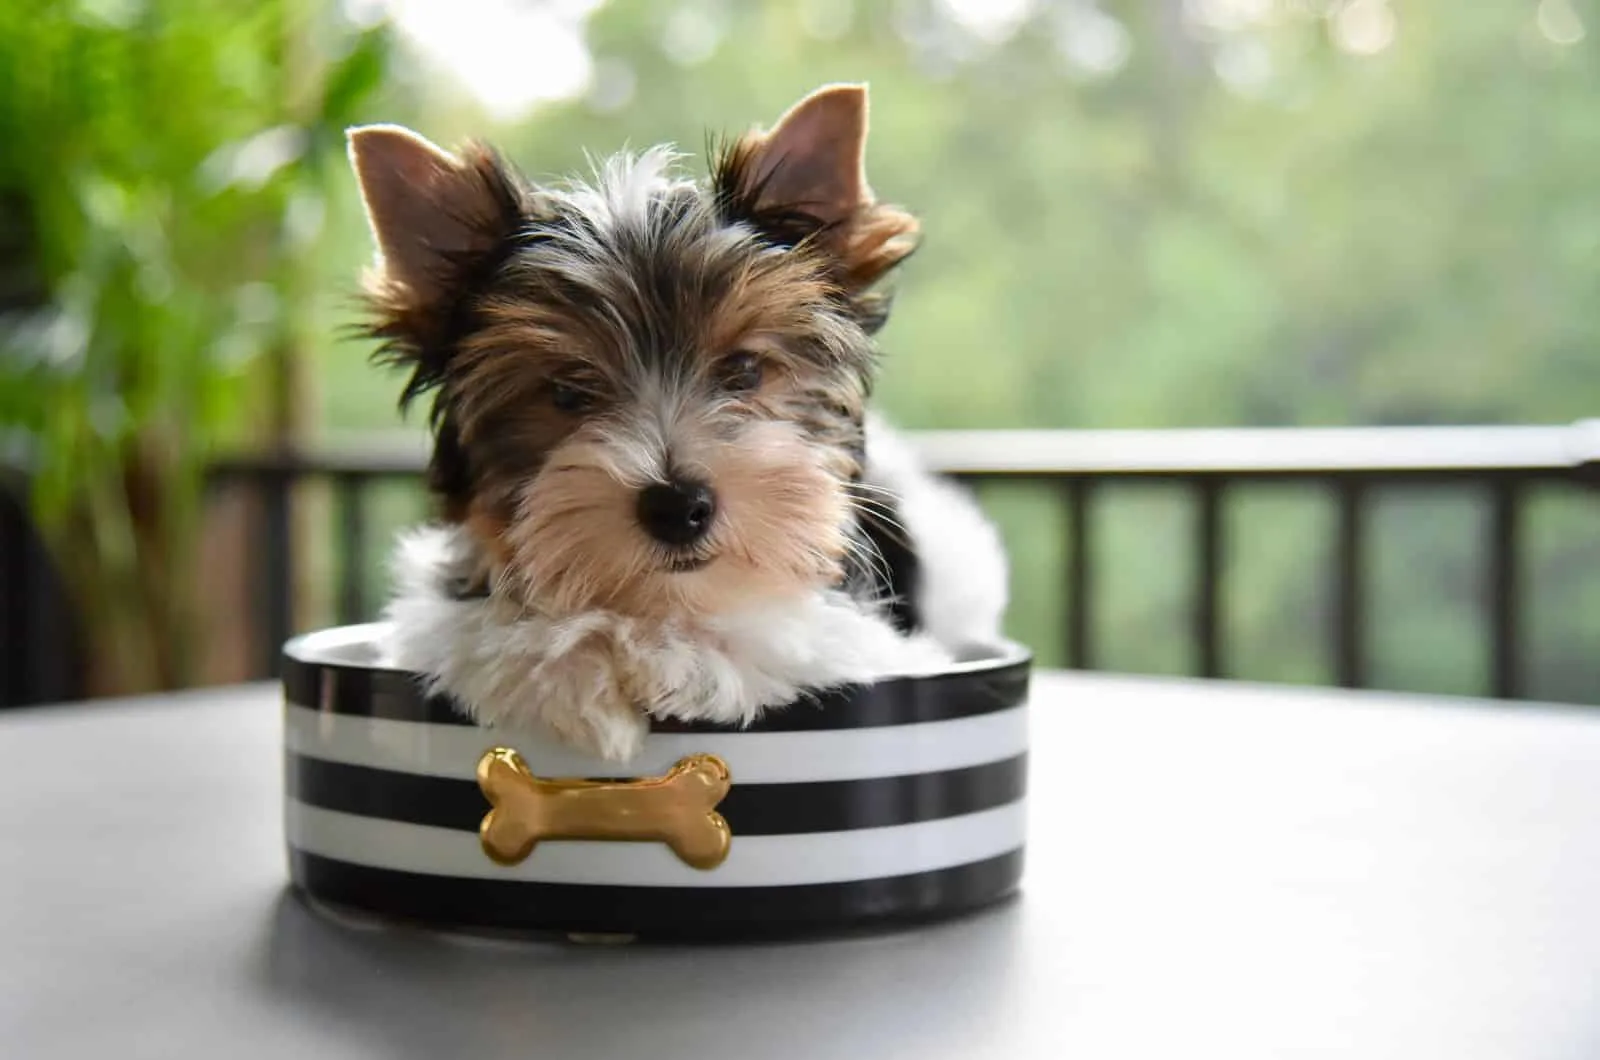 Yorkshire Terrier puppy sitting in a black and white bowl